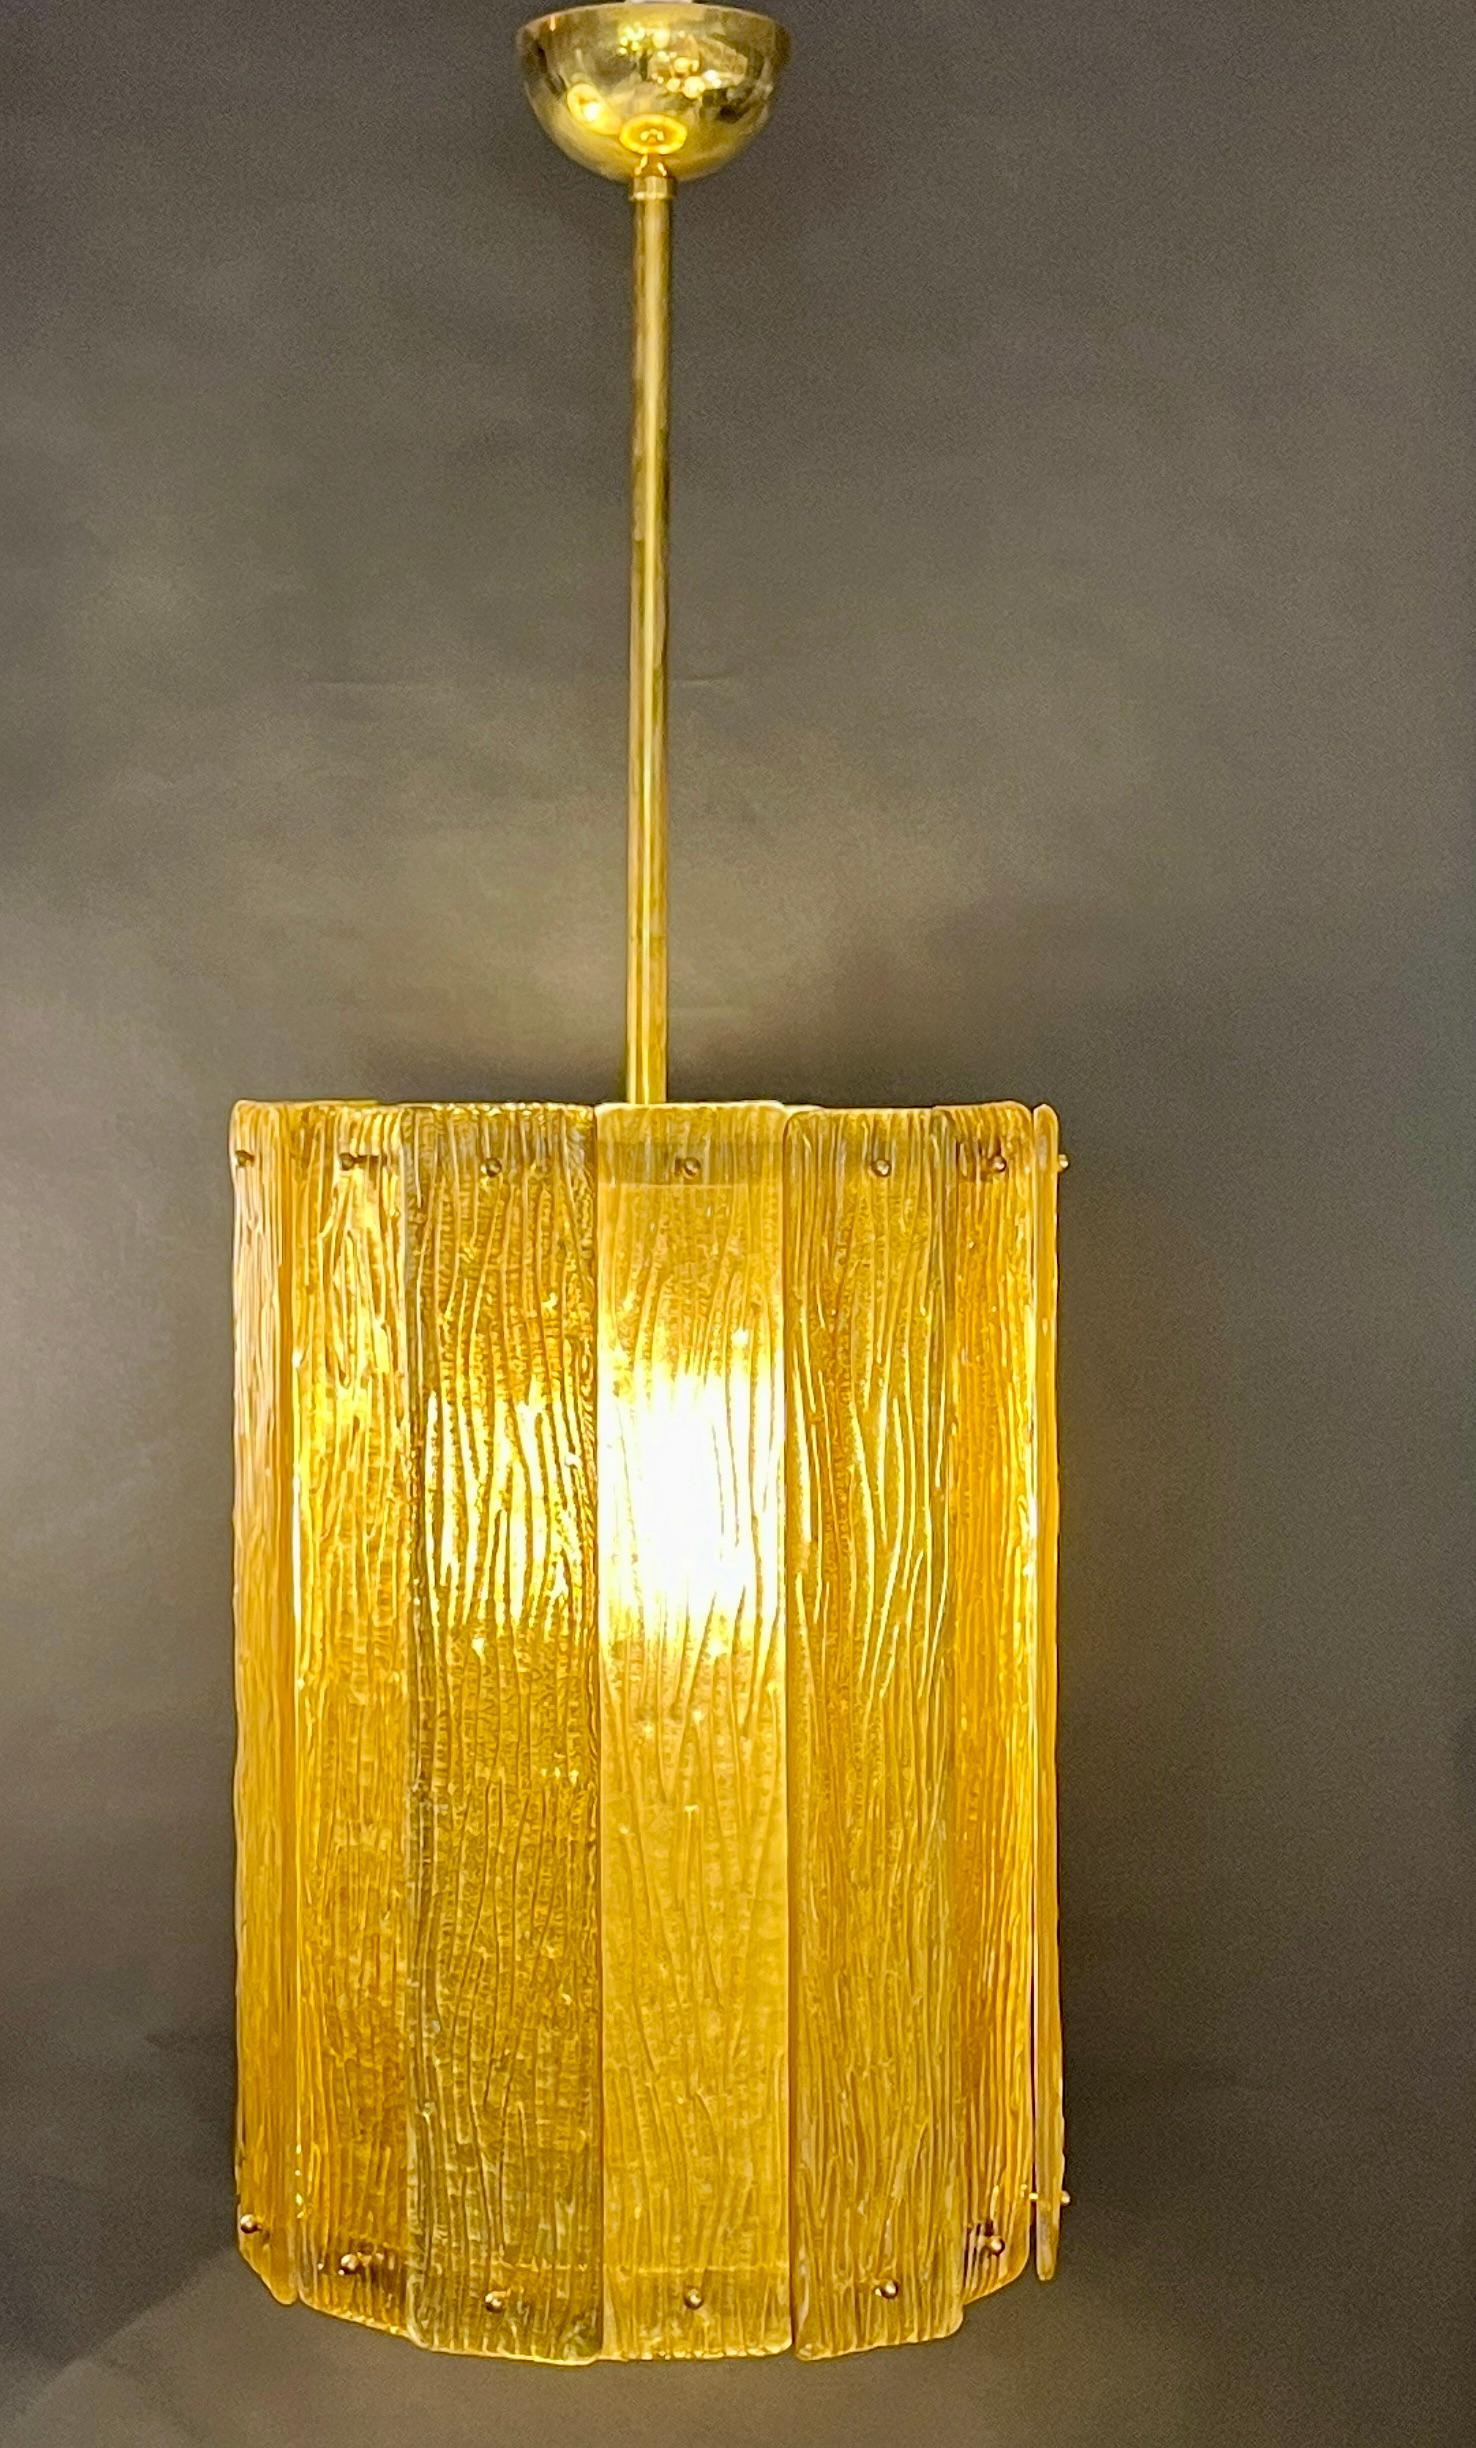 Unique contemporary Italian Art Deco design round pendant chandelier, entirely handcrafted. This light fixture is composed of a handmade brass structure supporting gold textured overlapping Murano glass bands, the amber glass decorated on reverse